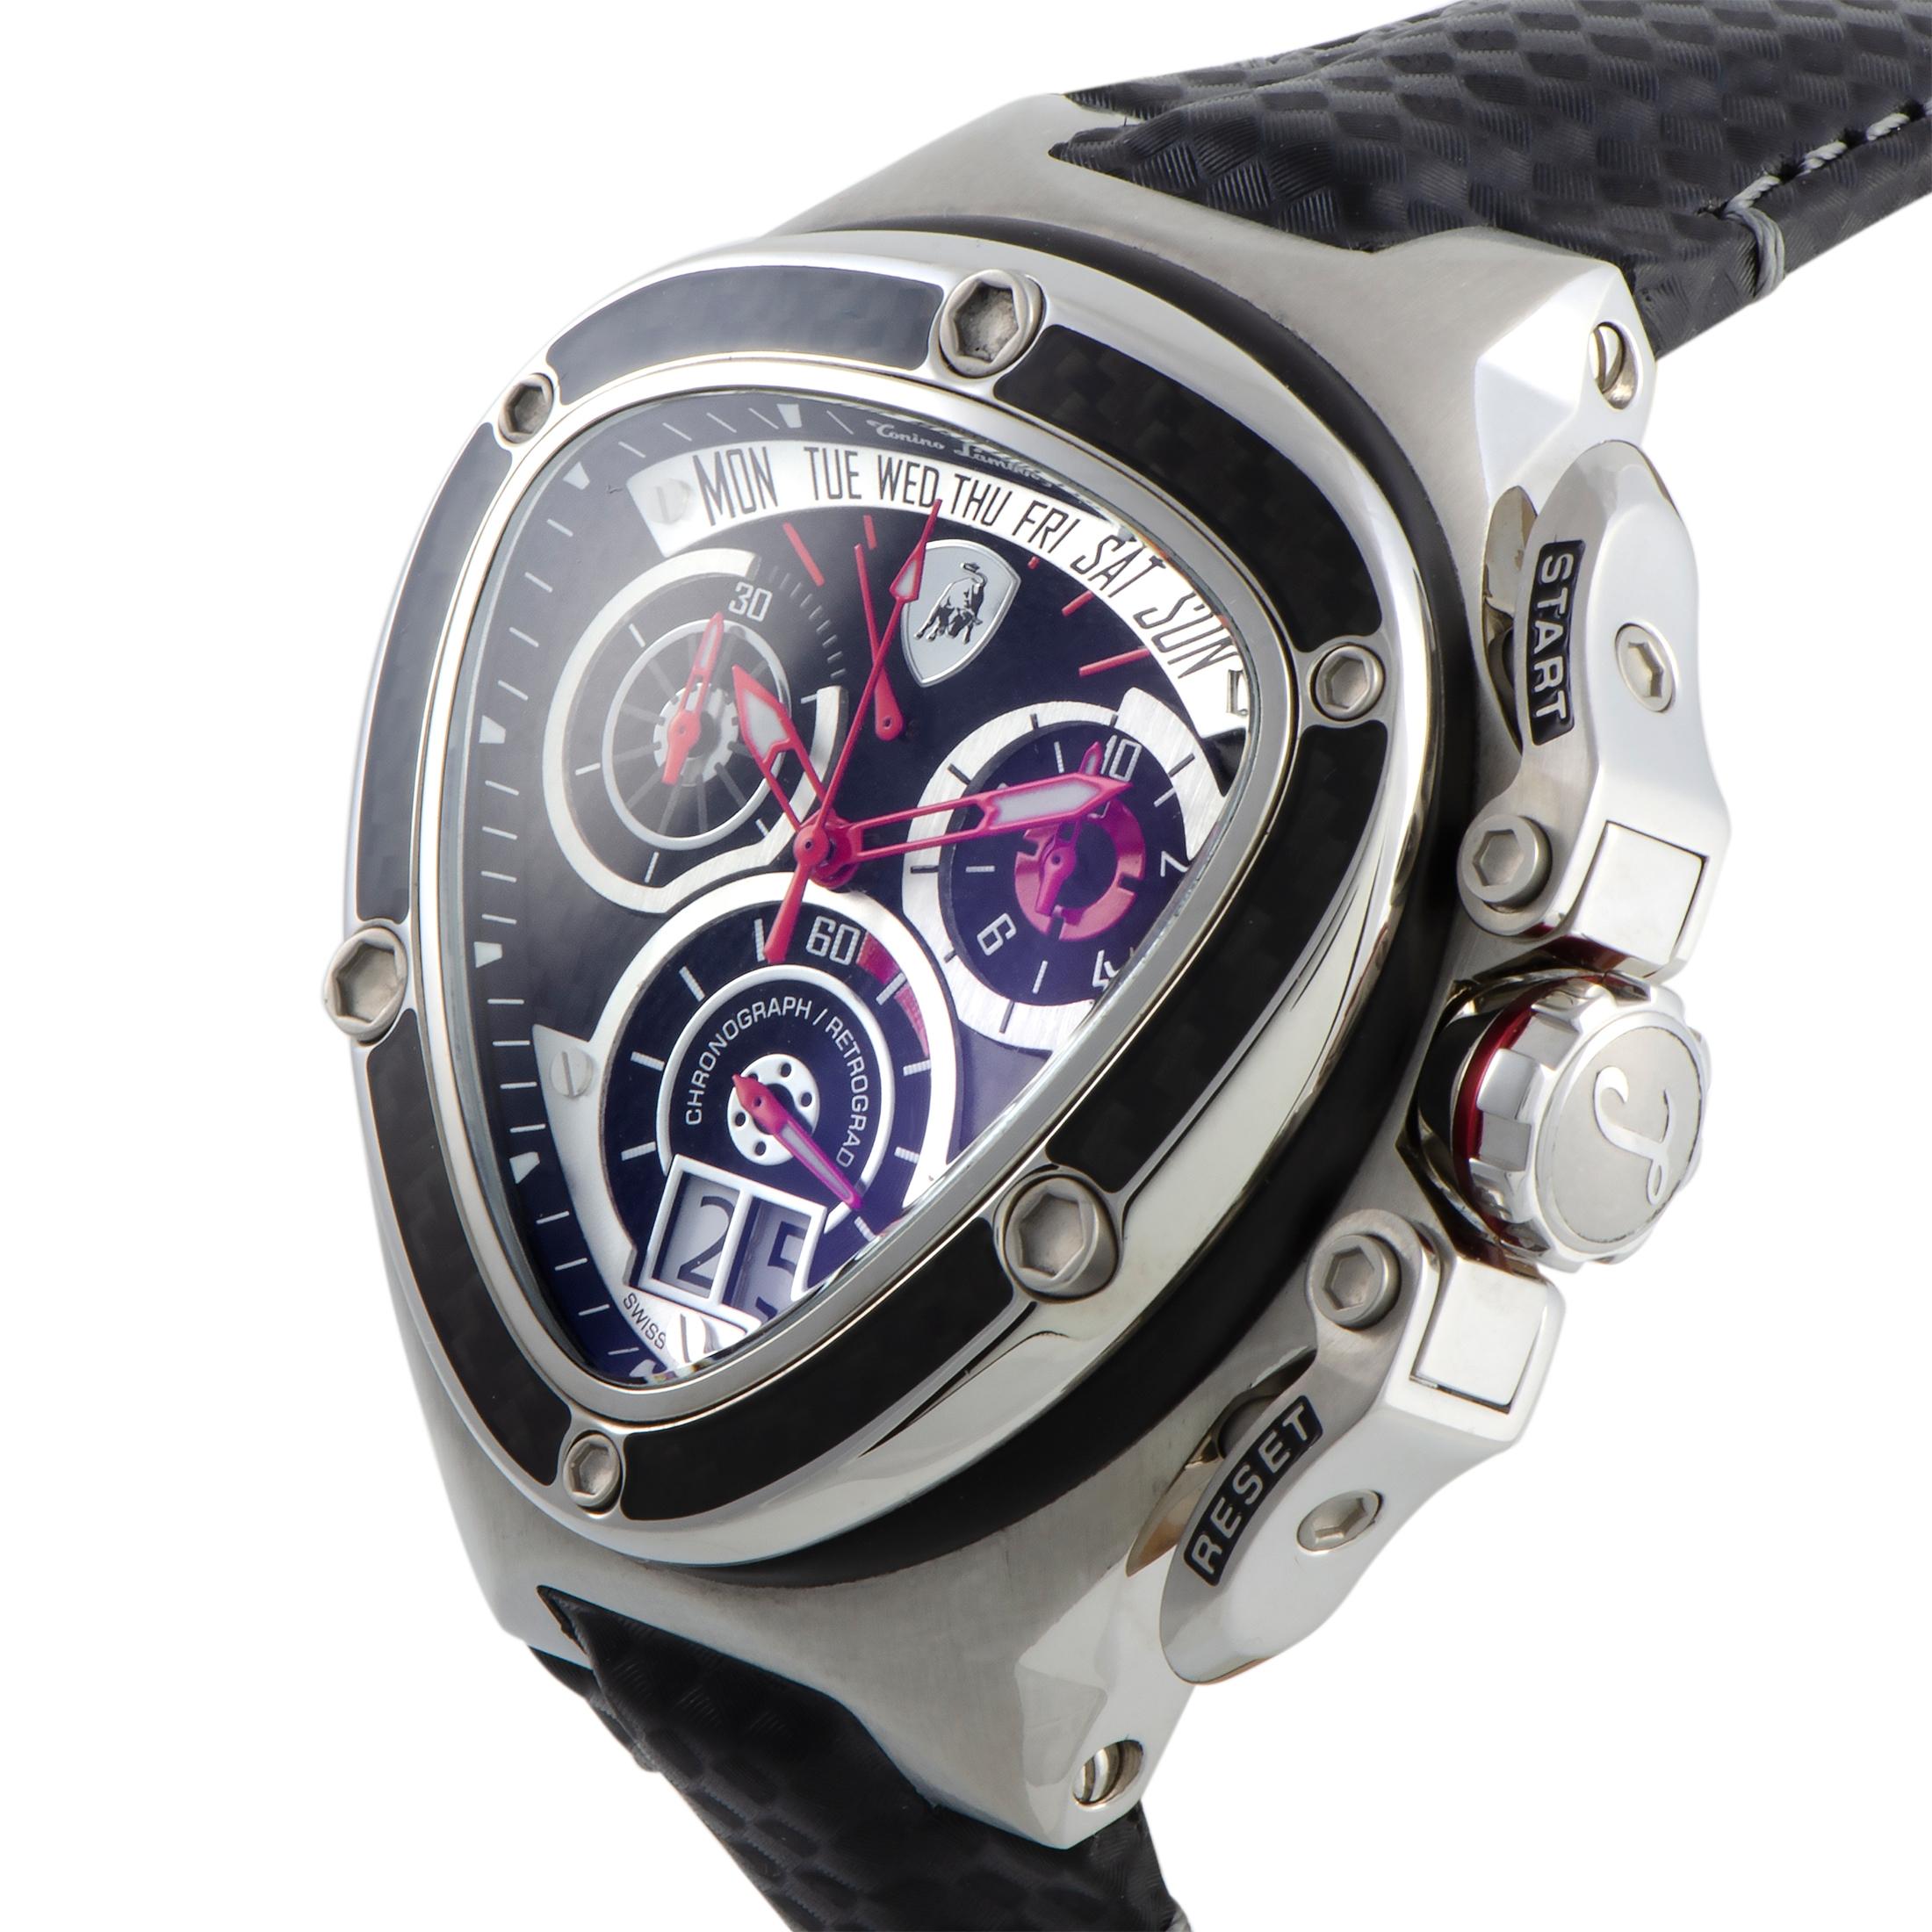 The Spyder Chronograph watch by Tonino Lamborghini, reference number 3020, is presented with a stainless steel case that features a bezel with carbon fiber insert. The case is water-resistant to 100 meters and mounted onto a black leather strap